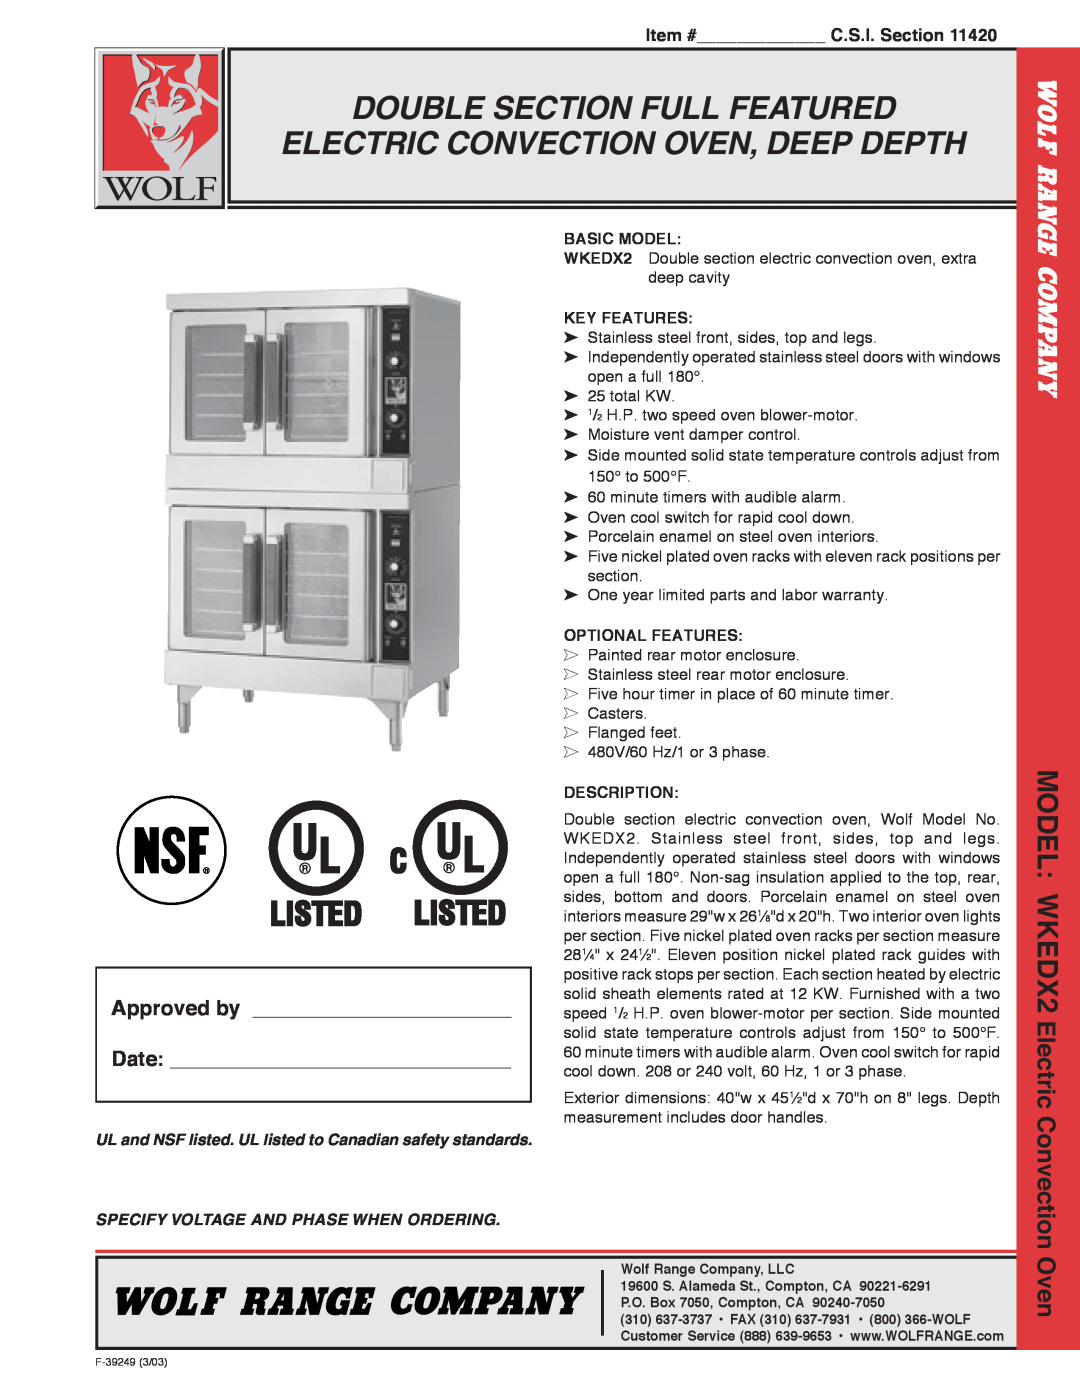 Wolf warranty Double Section Full Featured Electric Convection Oven, Deep Depth, MODEL WKEDX2, Approved by Date 